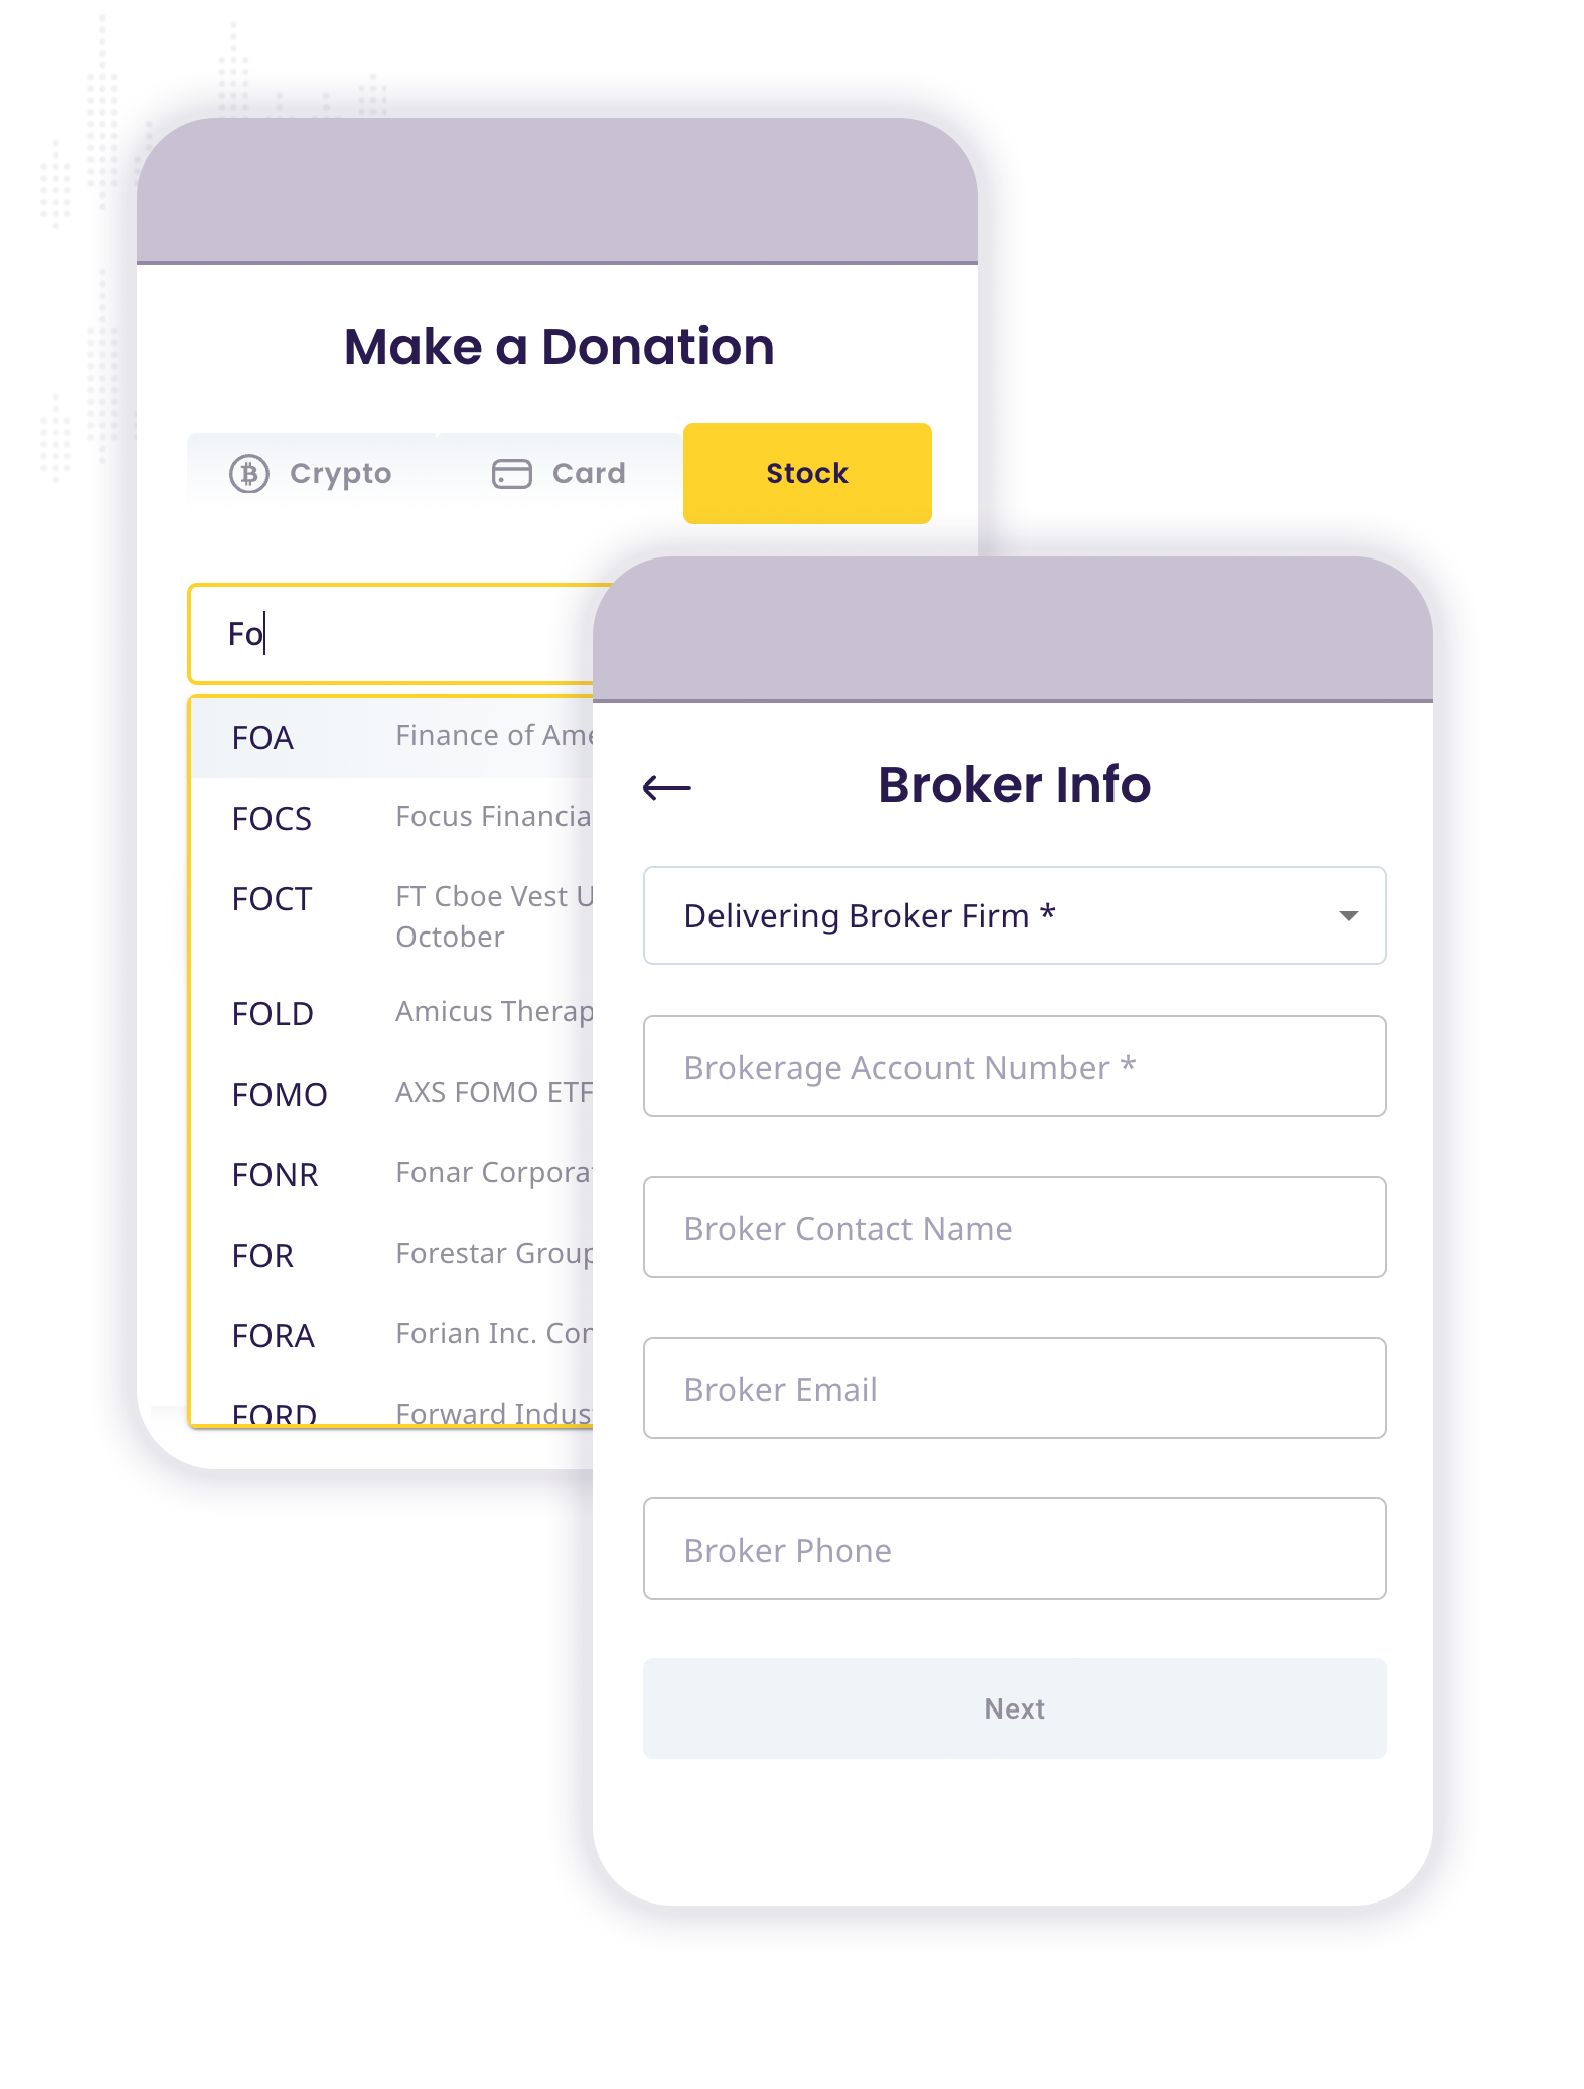 Make a Donation | The Giving Block